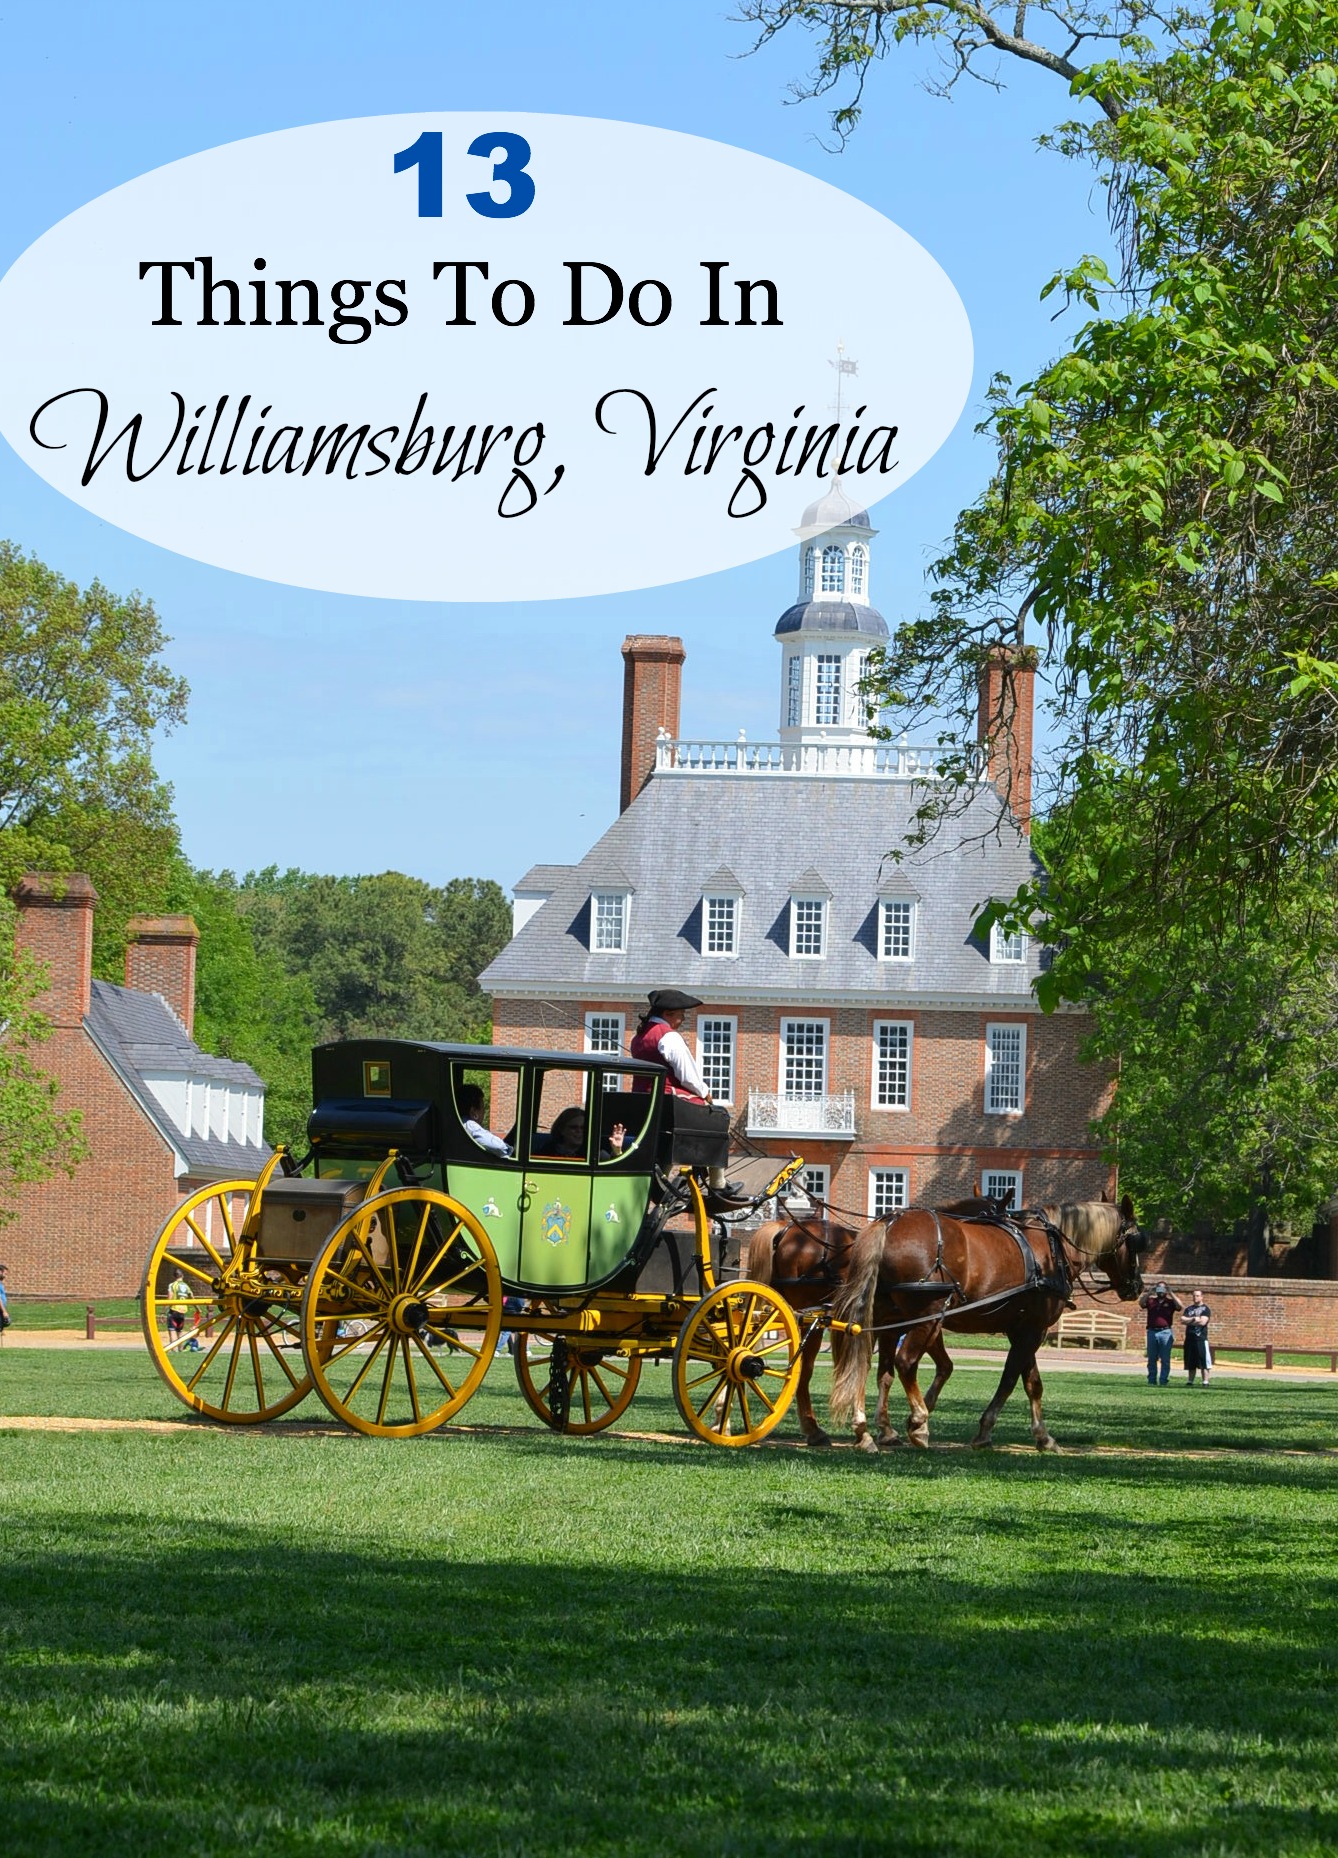 Things To Do In Williamsburg Virginia